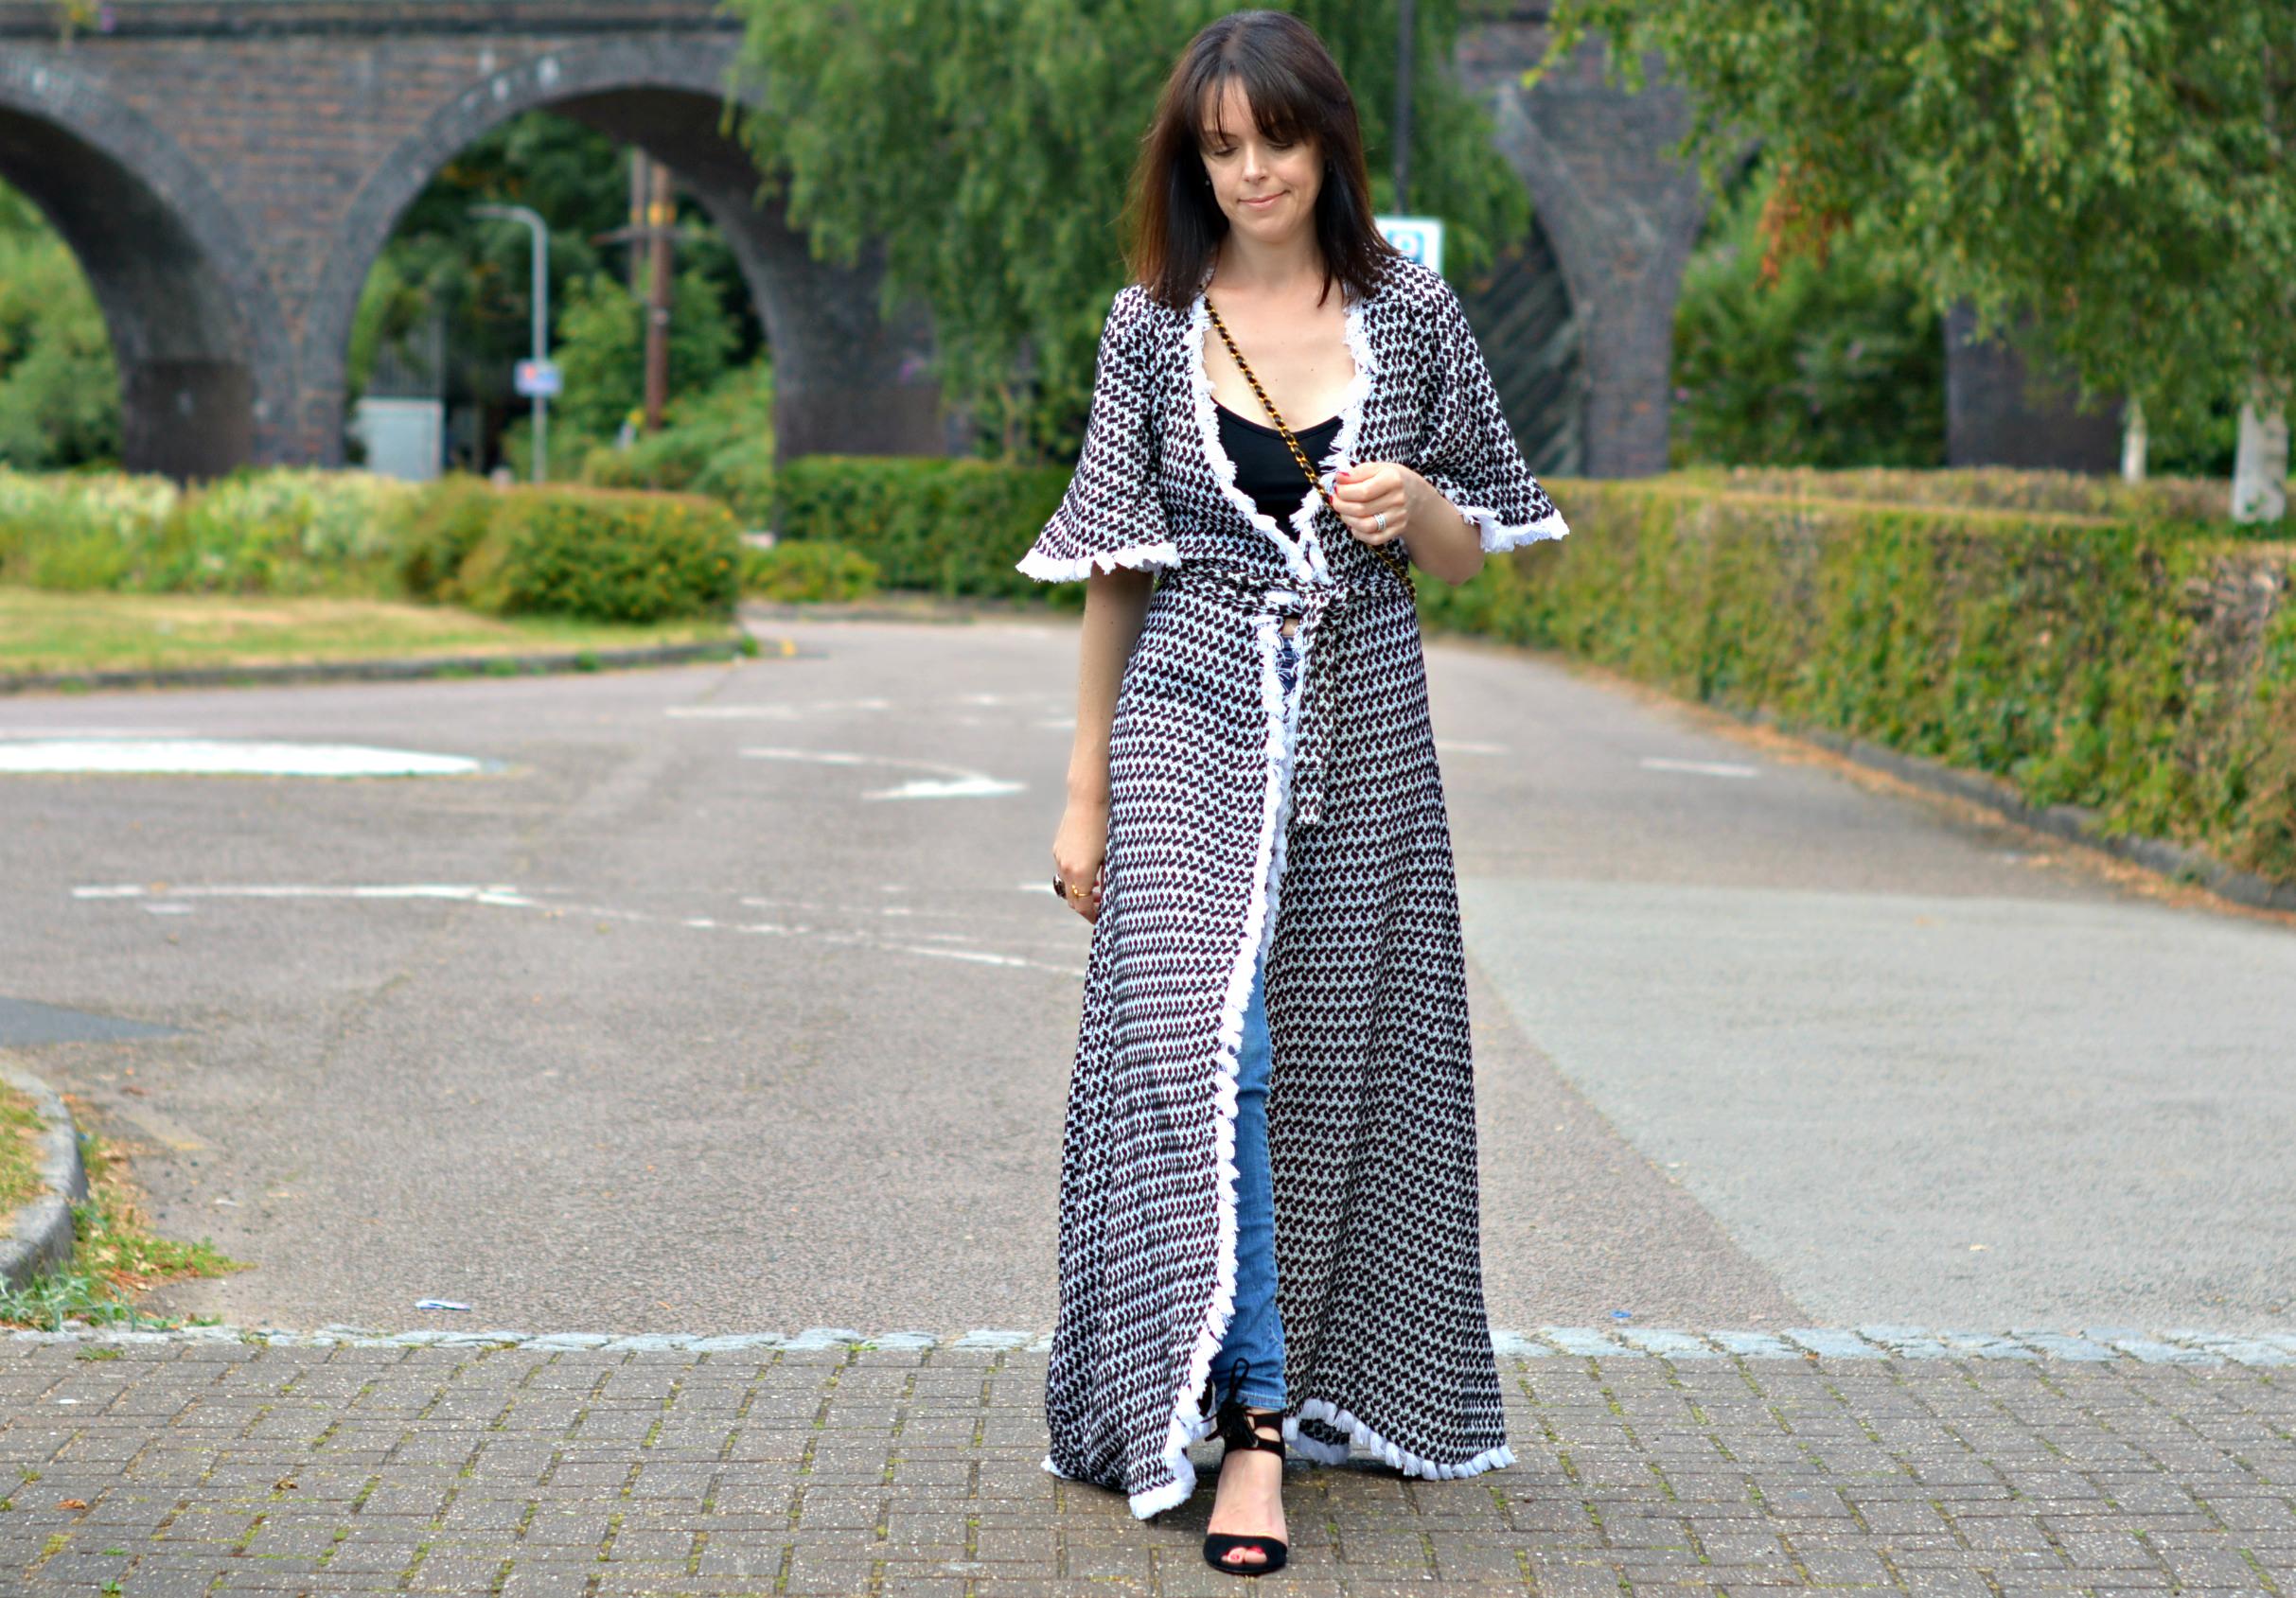 Wearing Dodo Bar Or maxi wrap dress over jeans as Duster coat on RetroChicMama - Fashion over 40 & getting the most from your wardrobe